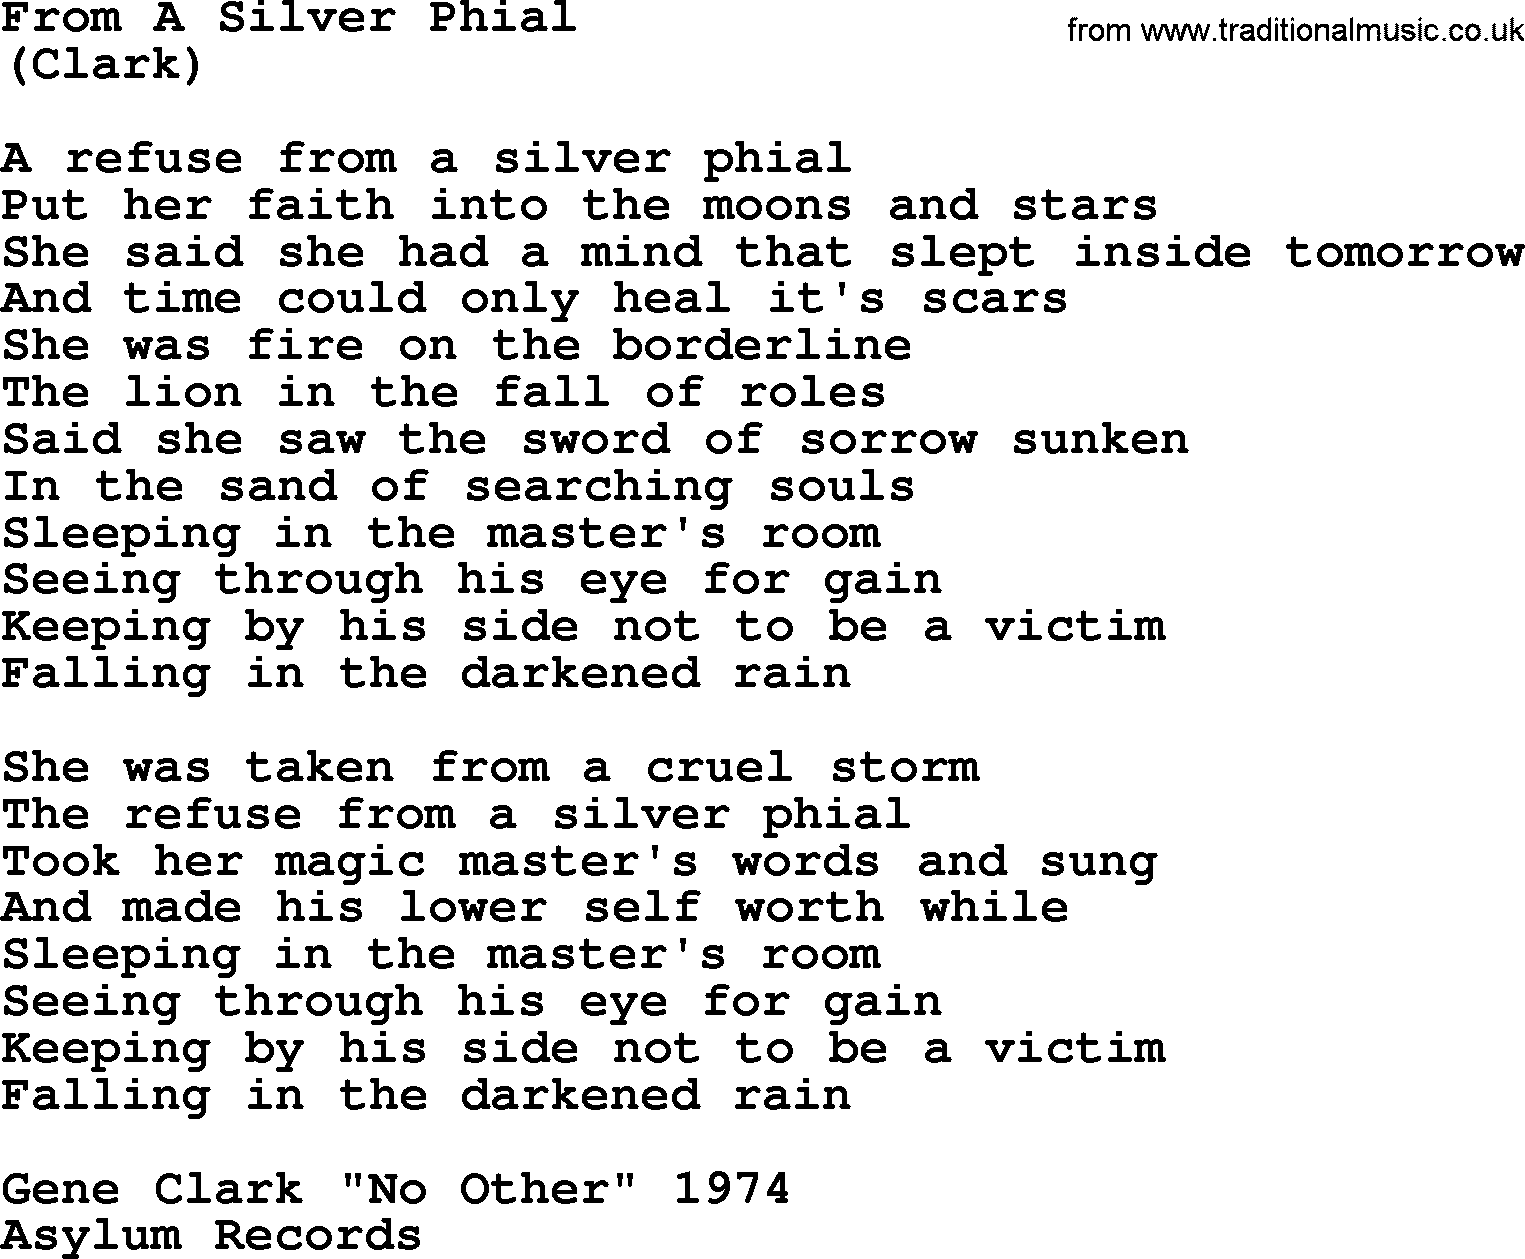 The Byrds song From A Silver Phial, lyrics